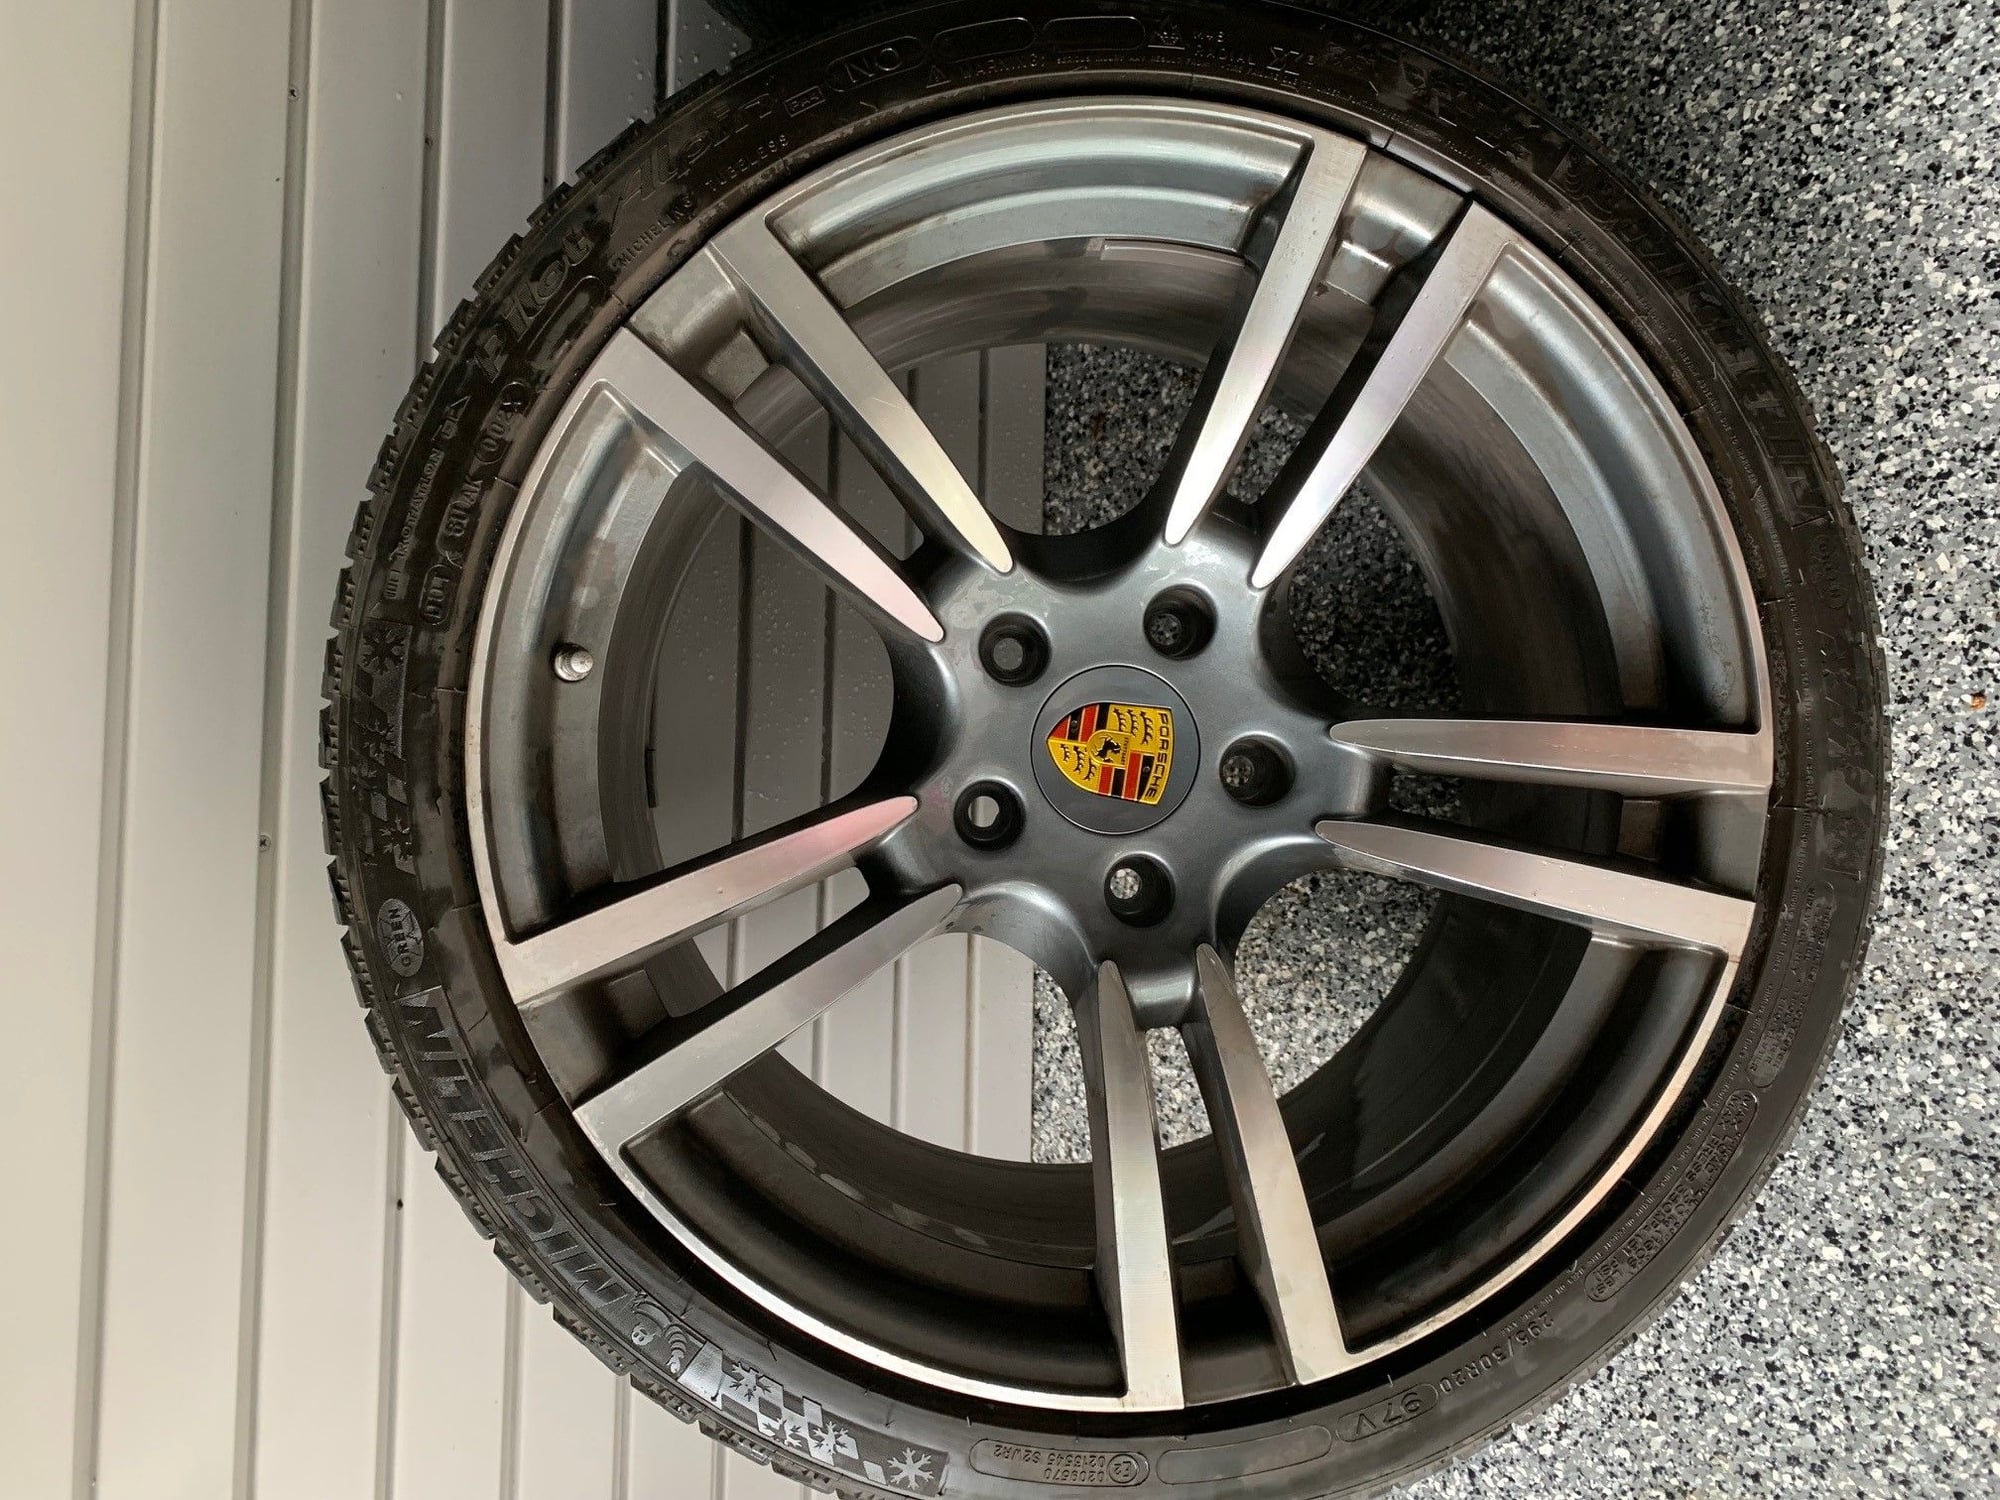 Wheels and Tires/Axles - 991 Winter Package $2500USD (shipped) - Used - 2012 to 2019 Porsche 911 - North York, ON M5M2S4, Canada